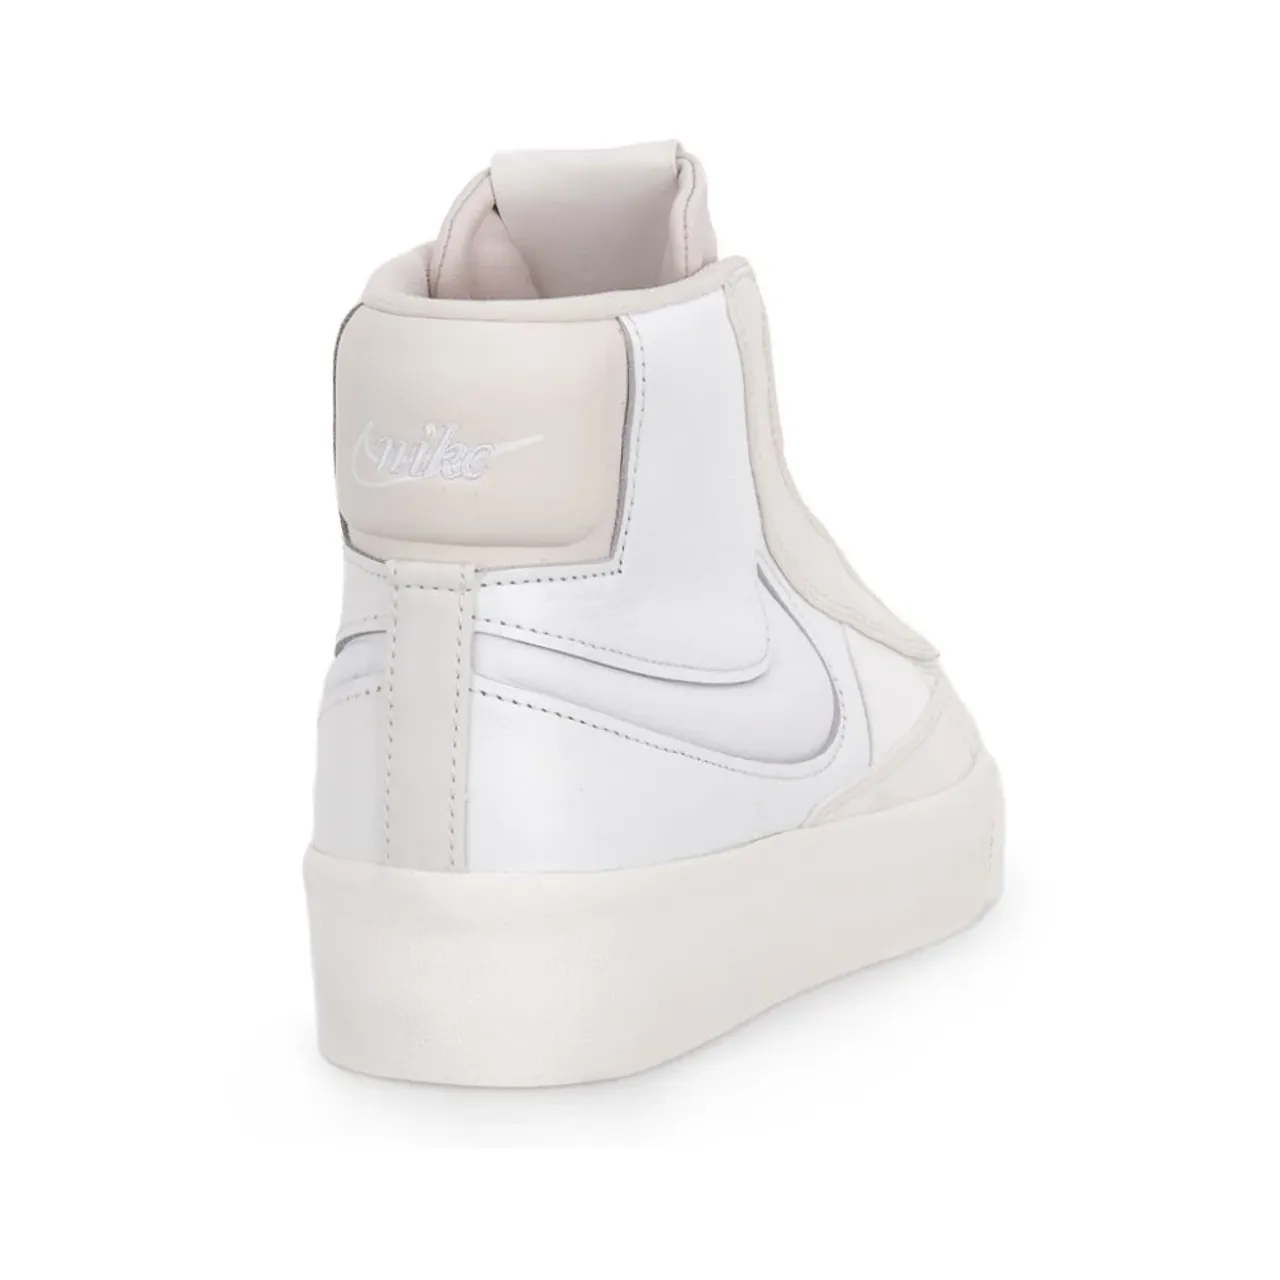 Nike , Blazer Mid Victory Sneakers ,White male, Sizes: